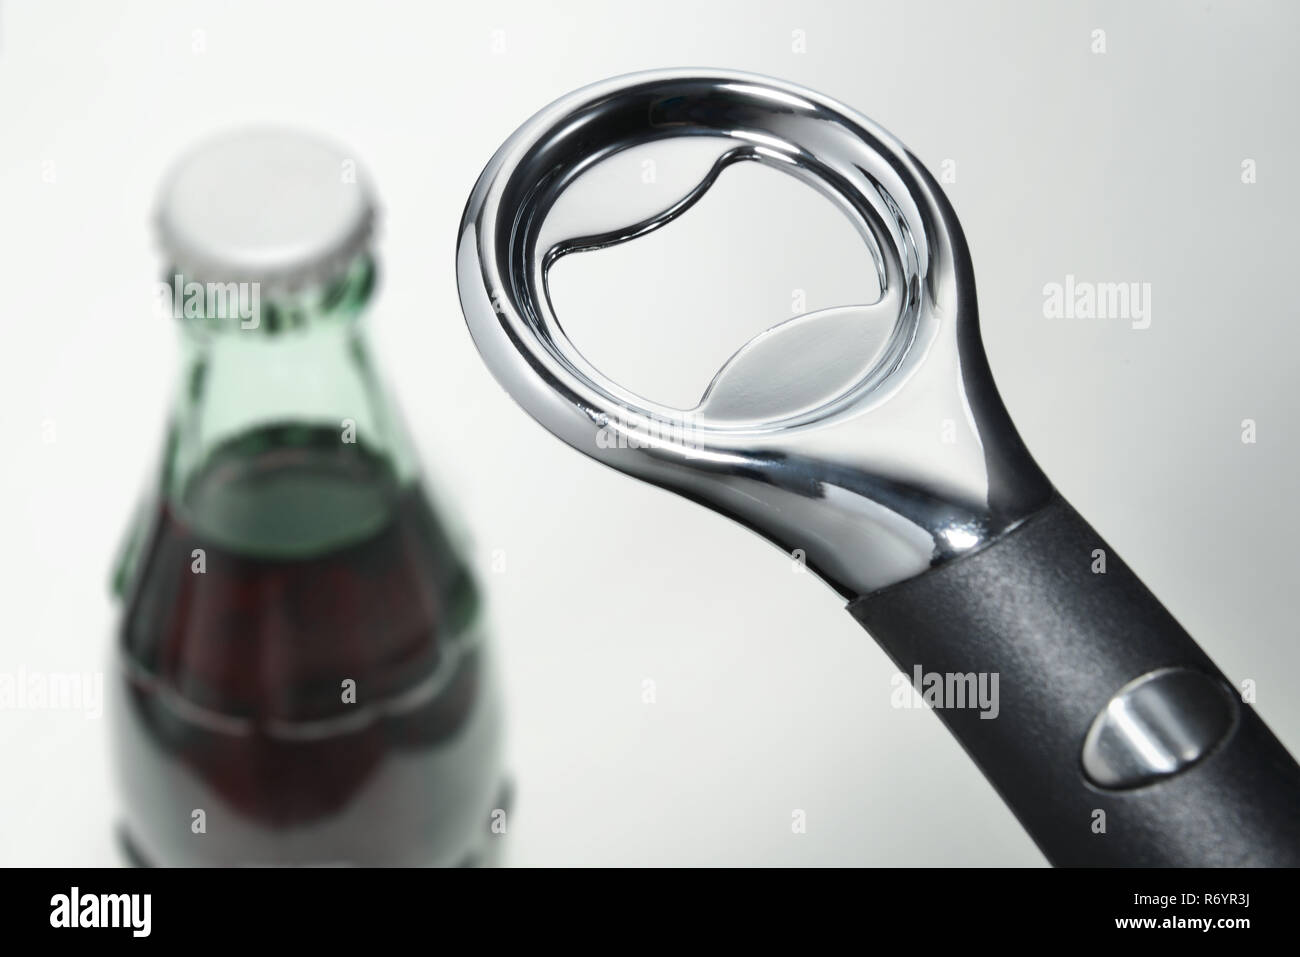 A bottle cap opener against a drink bottle background Stock Photo